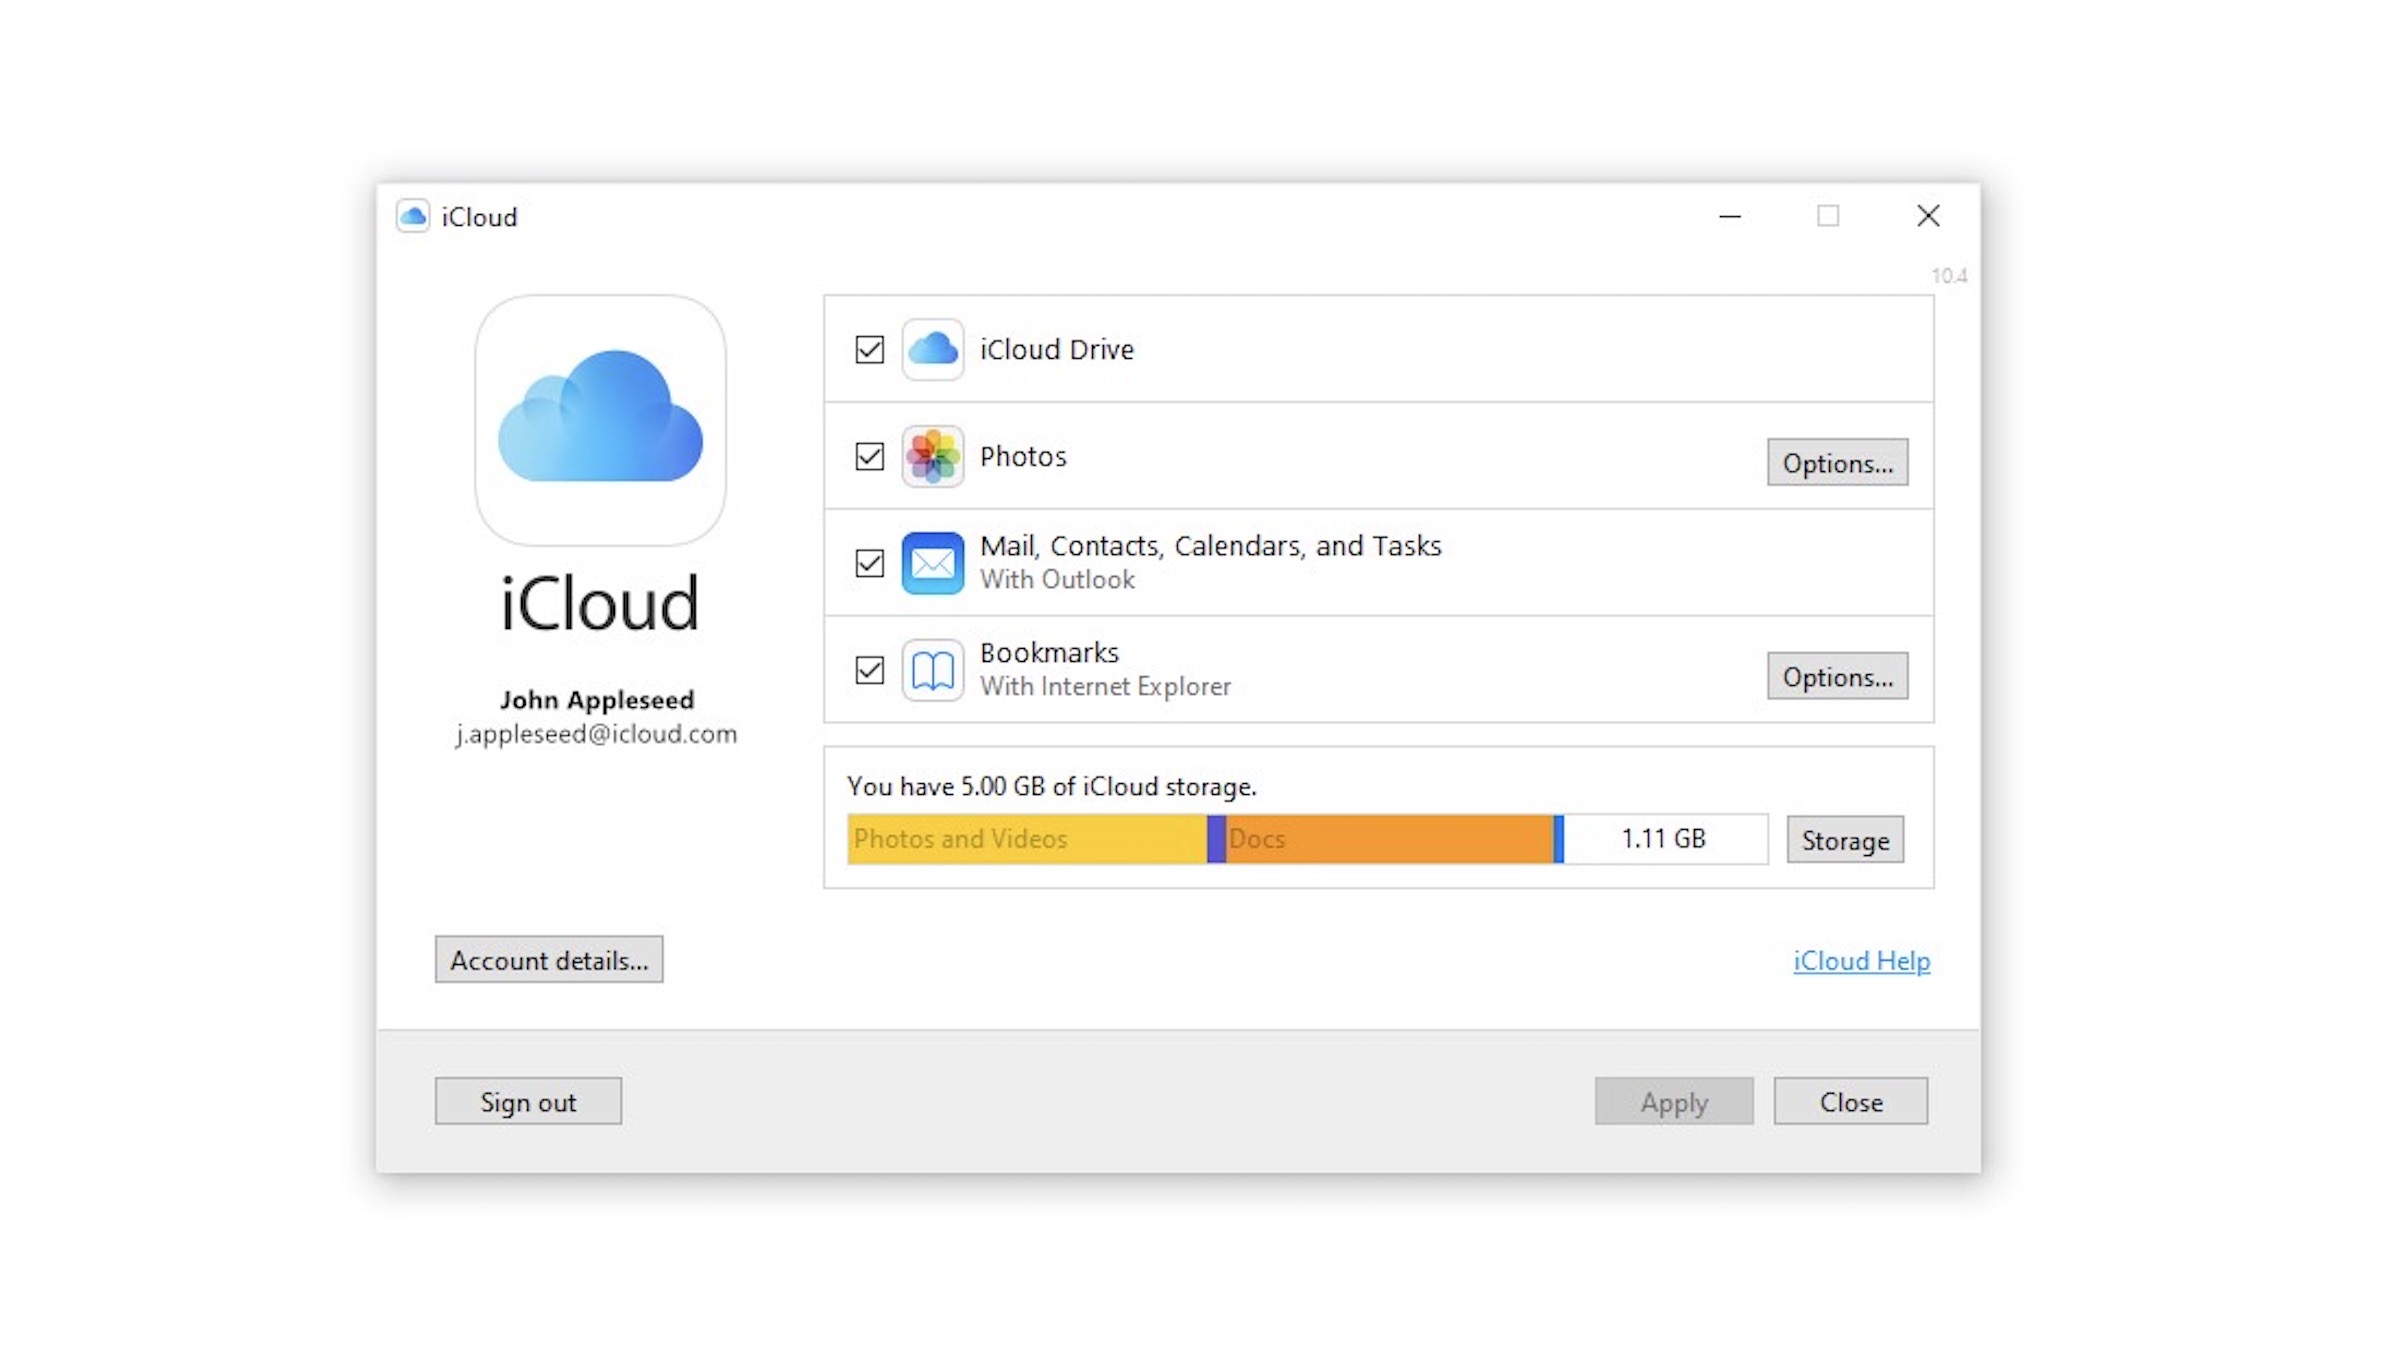 how to download all photos from icloud to windows 10